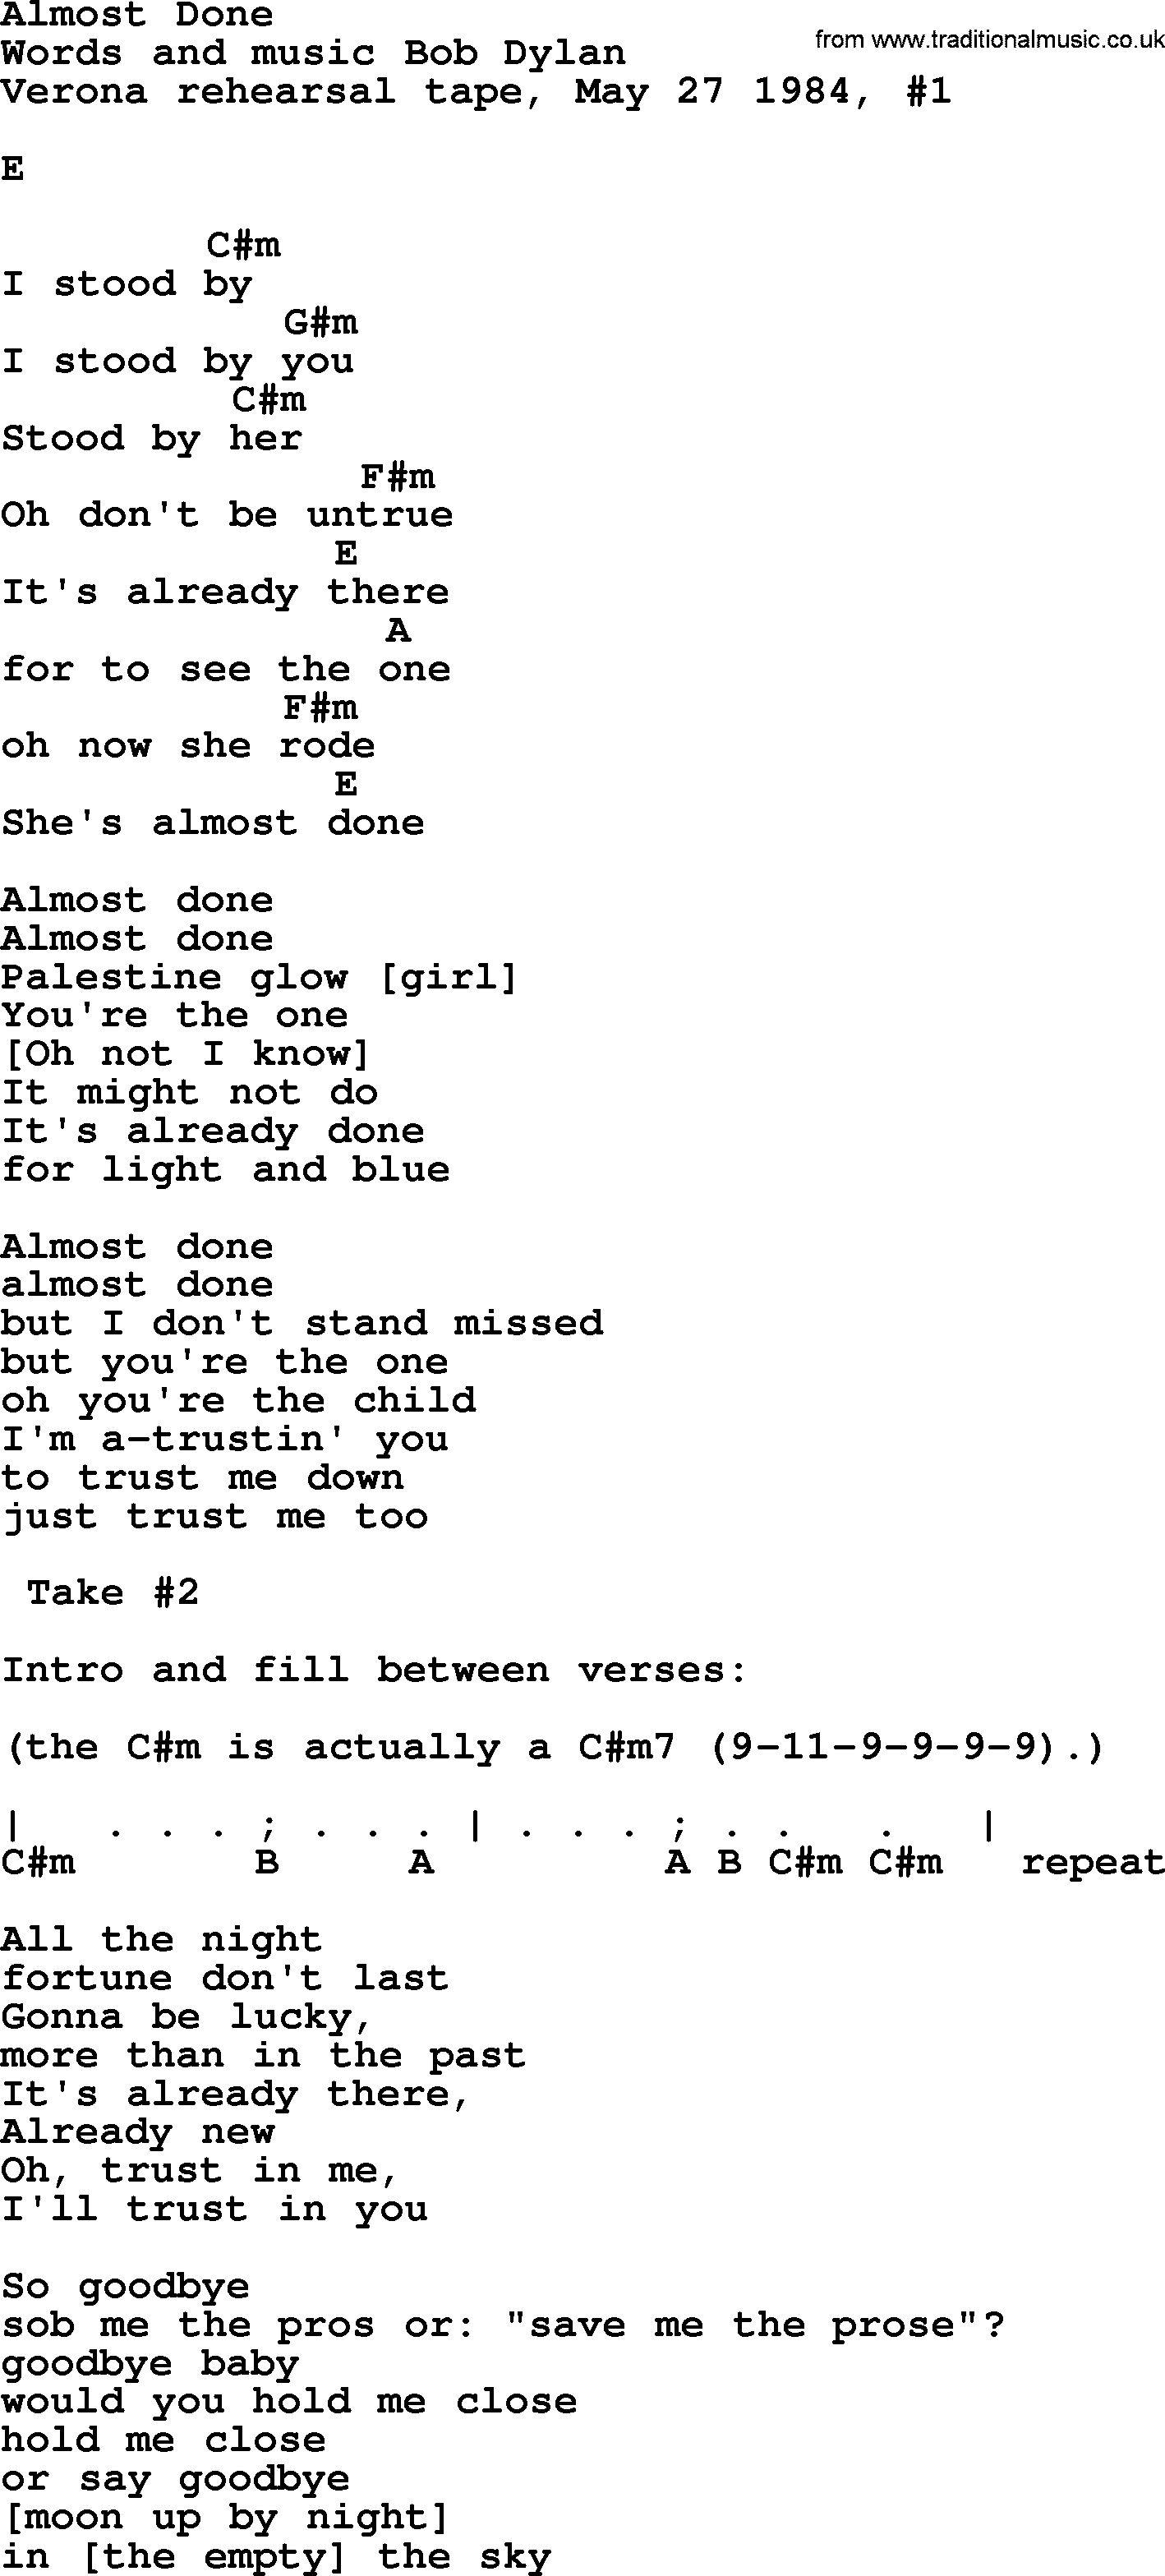 Bob Dylan song, lyrics with chords - Almost Done